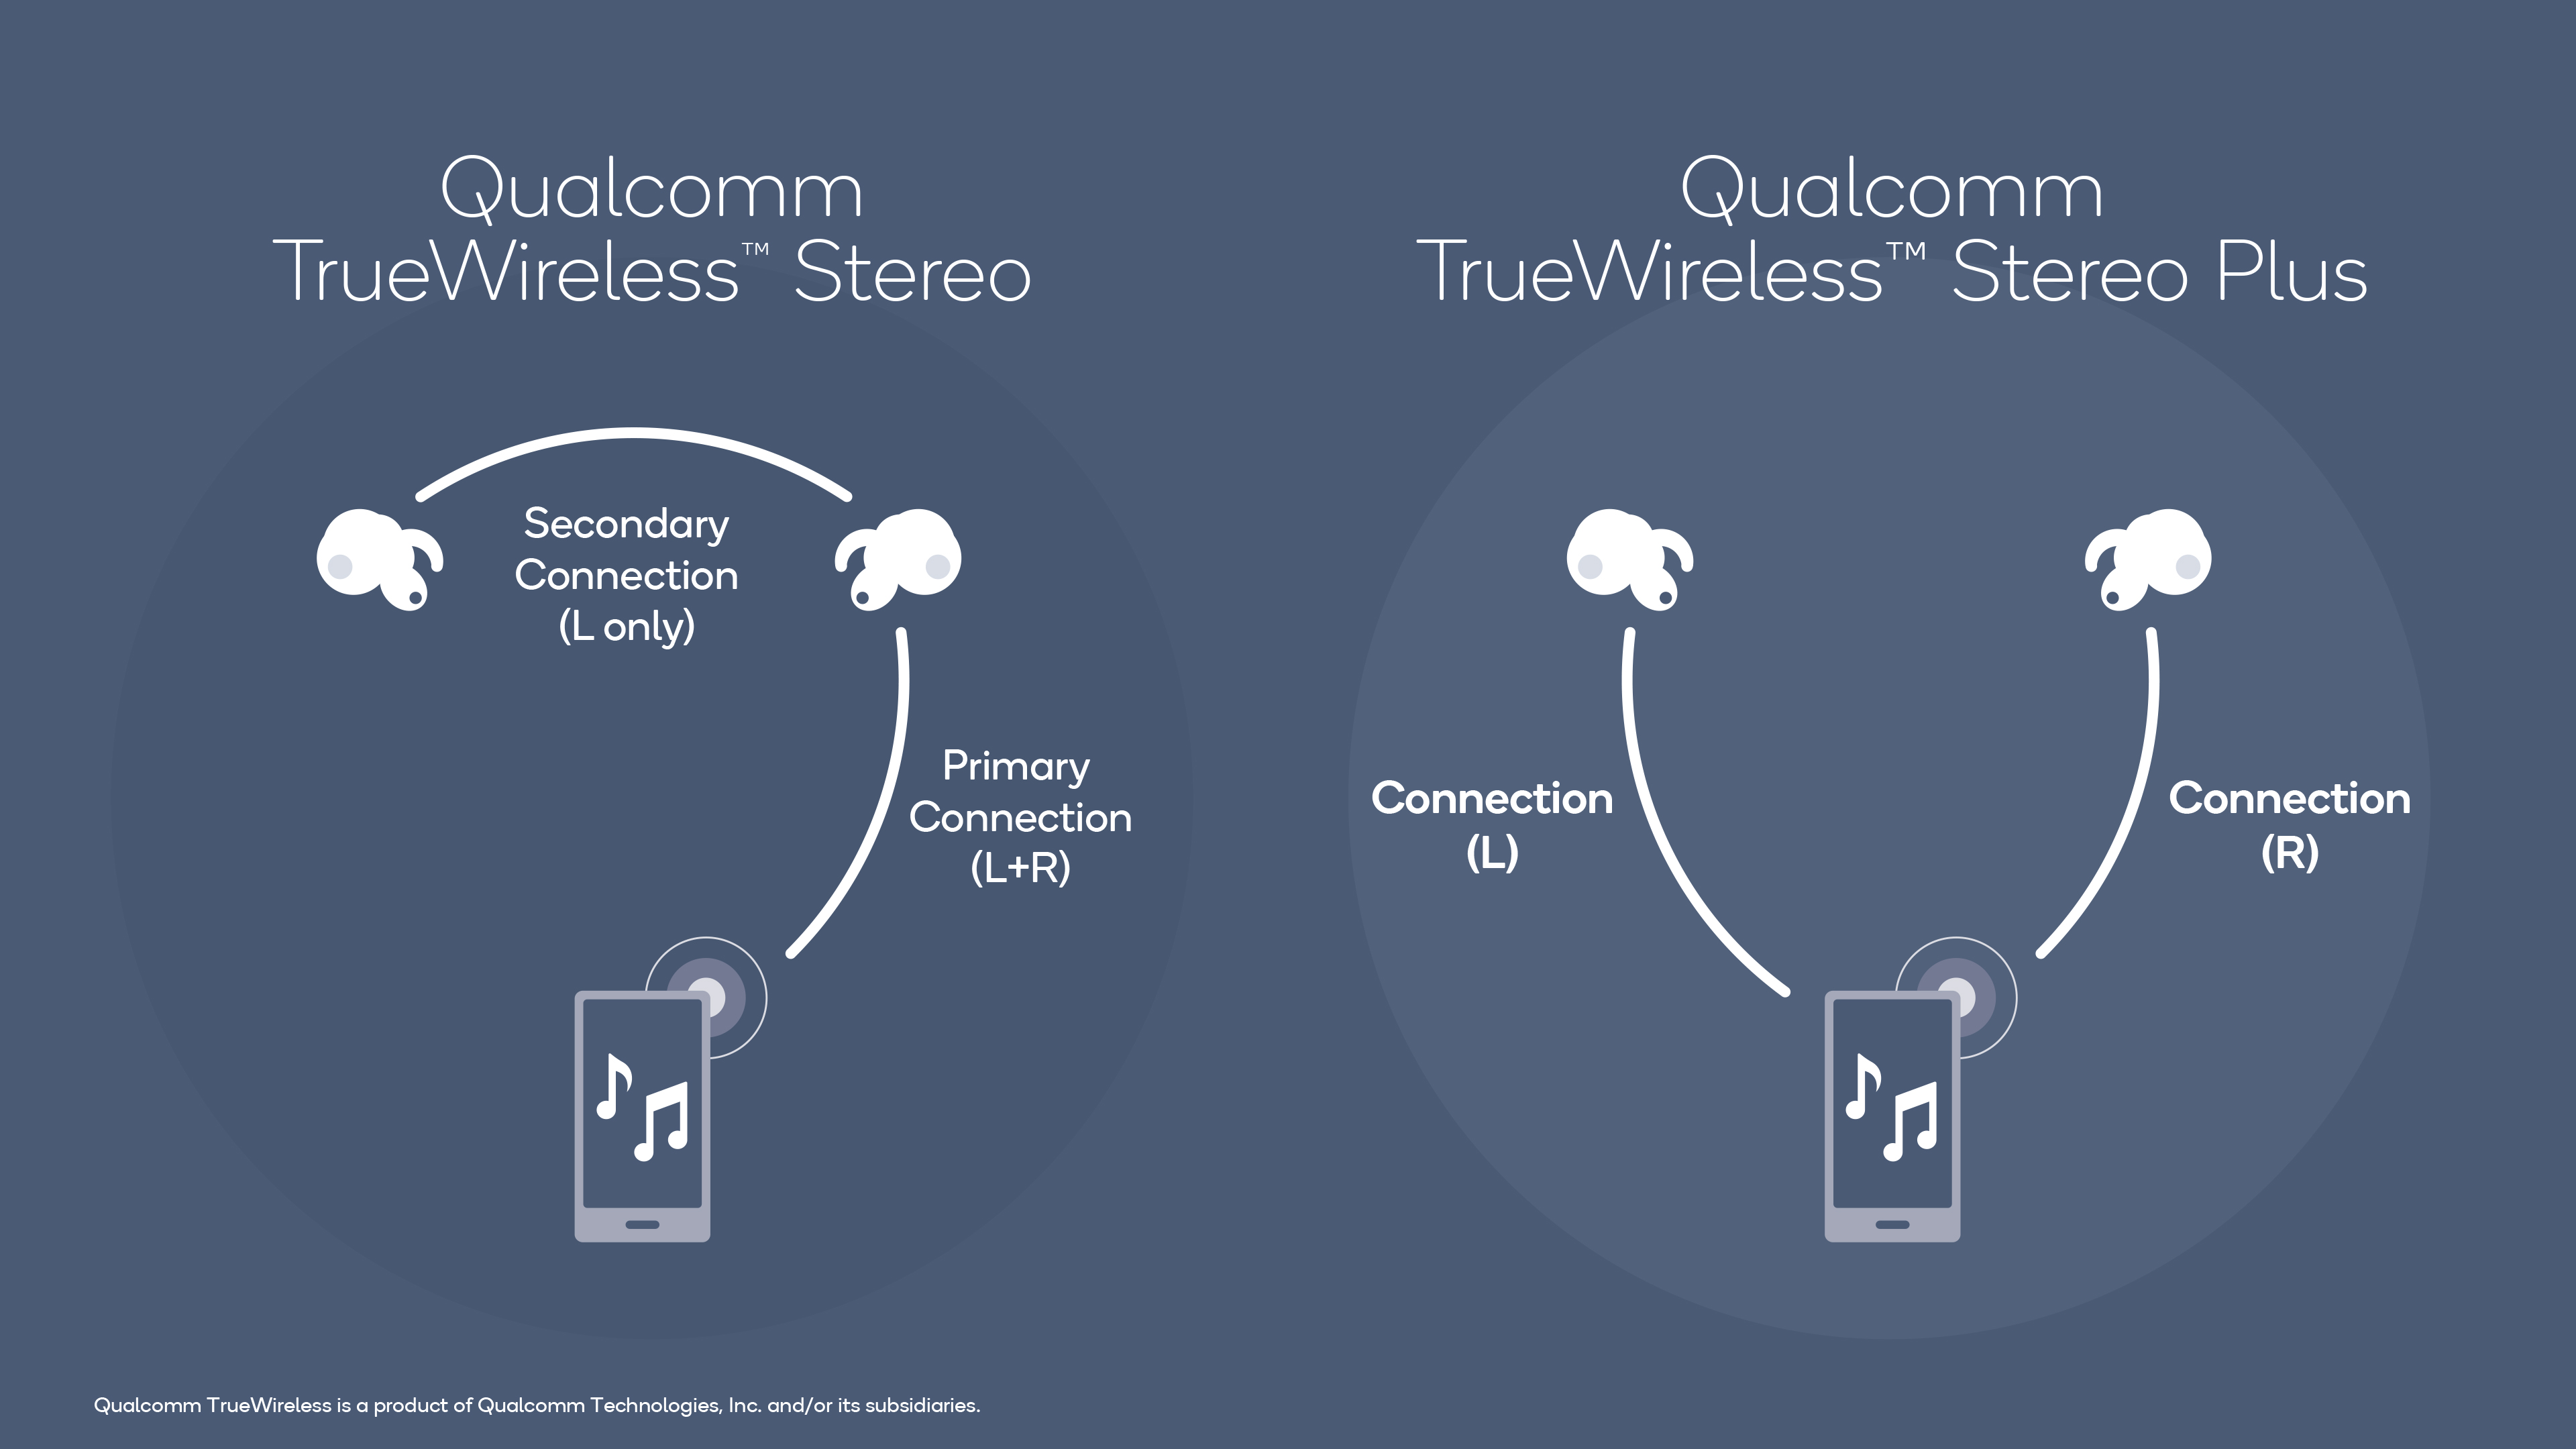 USB-C headphones - Qualcomm TrueWireless Stereo Plus allows for a simultaneous connection between the source device and left and right earbuds. This reduces latency and improves connectivity. Pictured: A diagram of Qualcomm TrueWireless Stereo technology, which sets one earbud as a primary and the latter as a secondary receiver. On the right side is Qualcomm TrueWireless Stereo Plus, which simultaneously communicates with both earbuds.